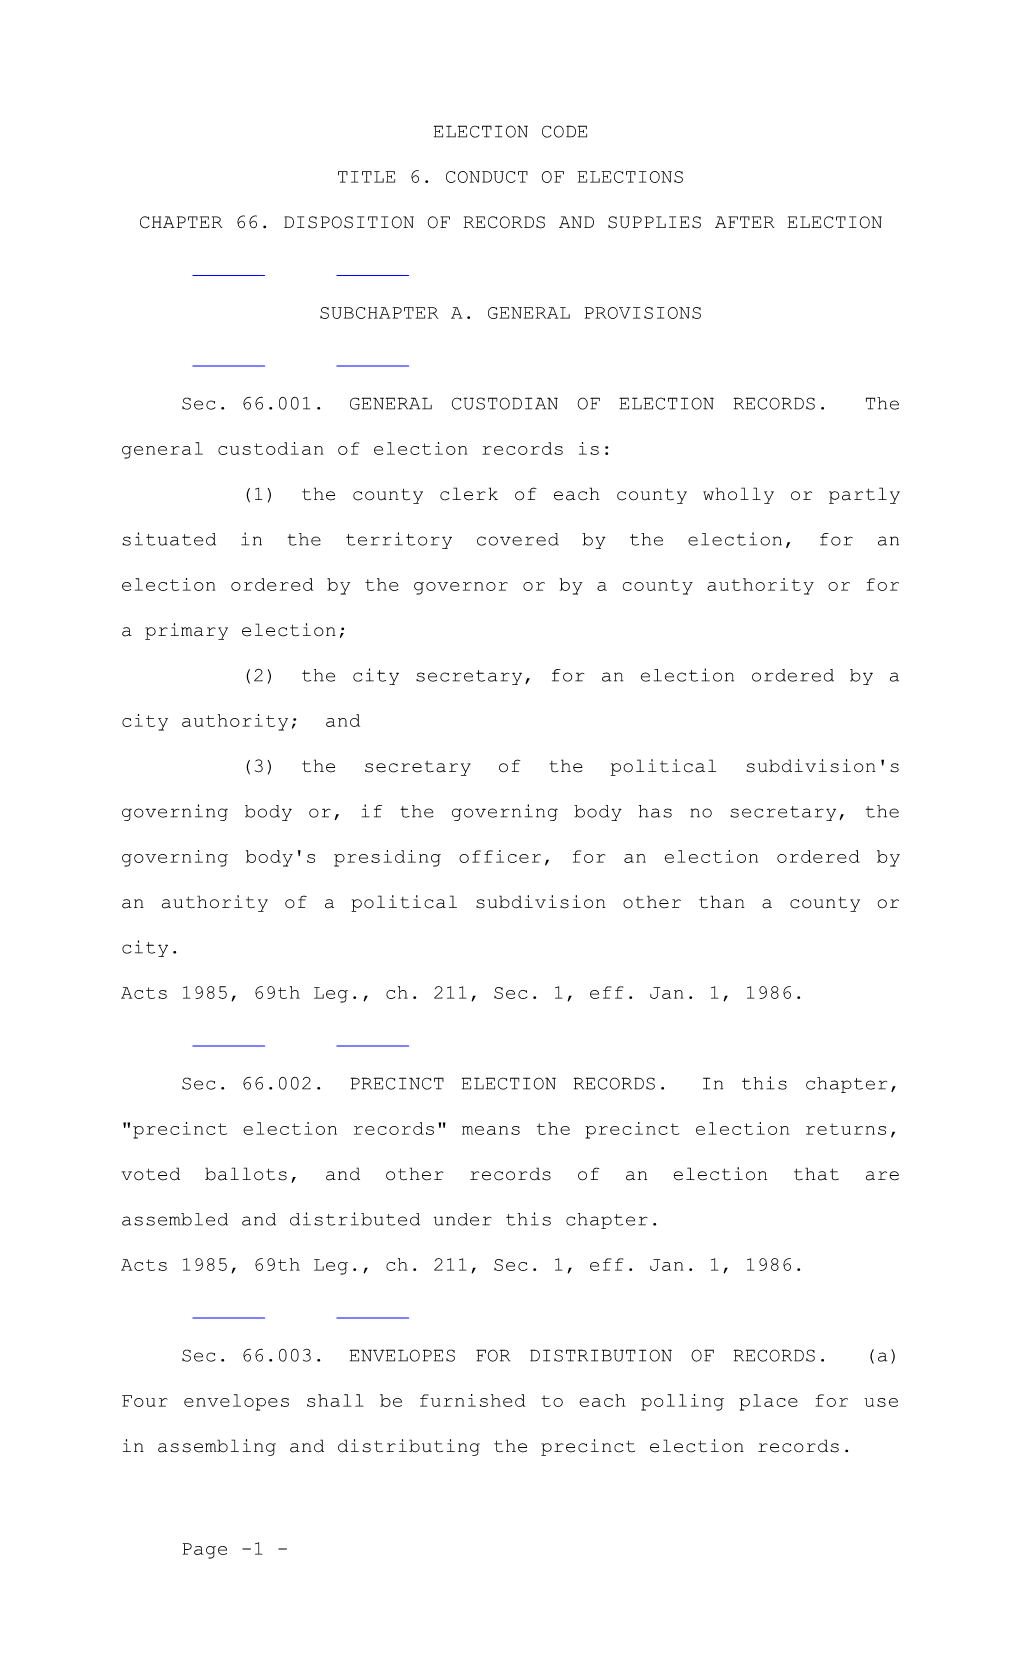 Chapter 66. Disposition of Records and Supplies After Election